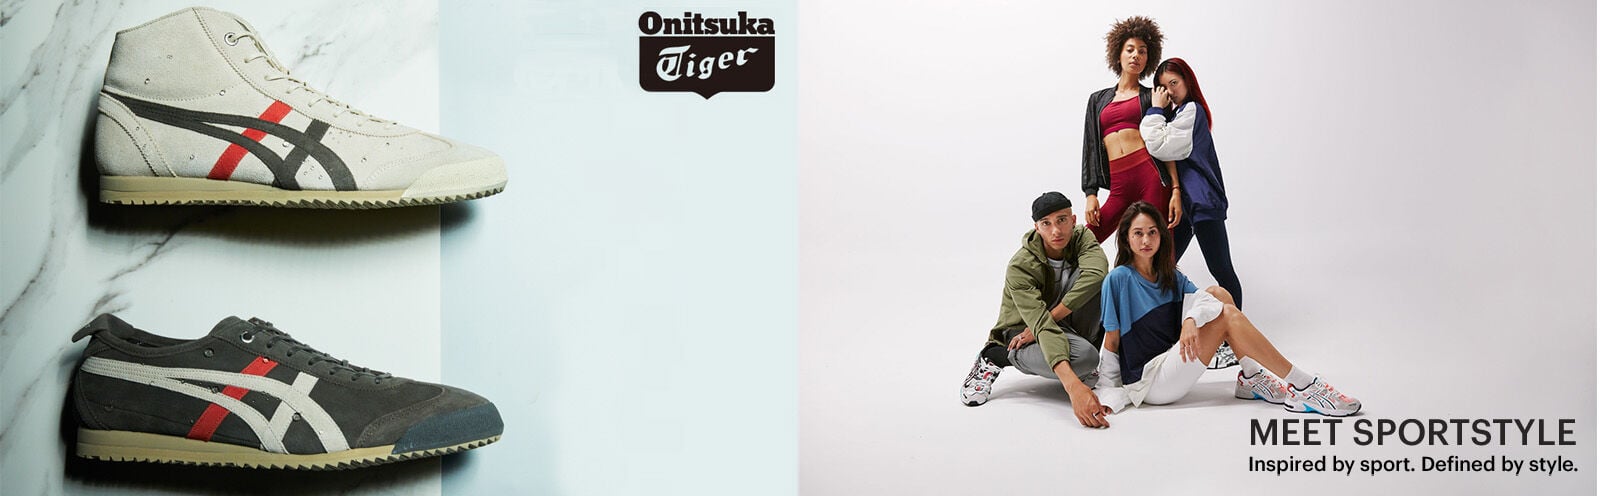 Are you looking for Onitsuka Tiger or Asics Tiger?